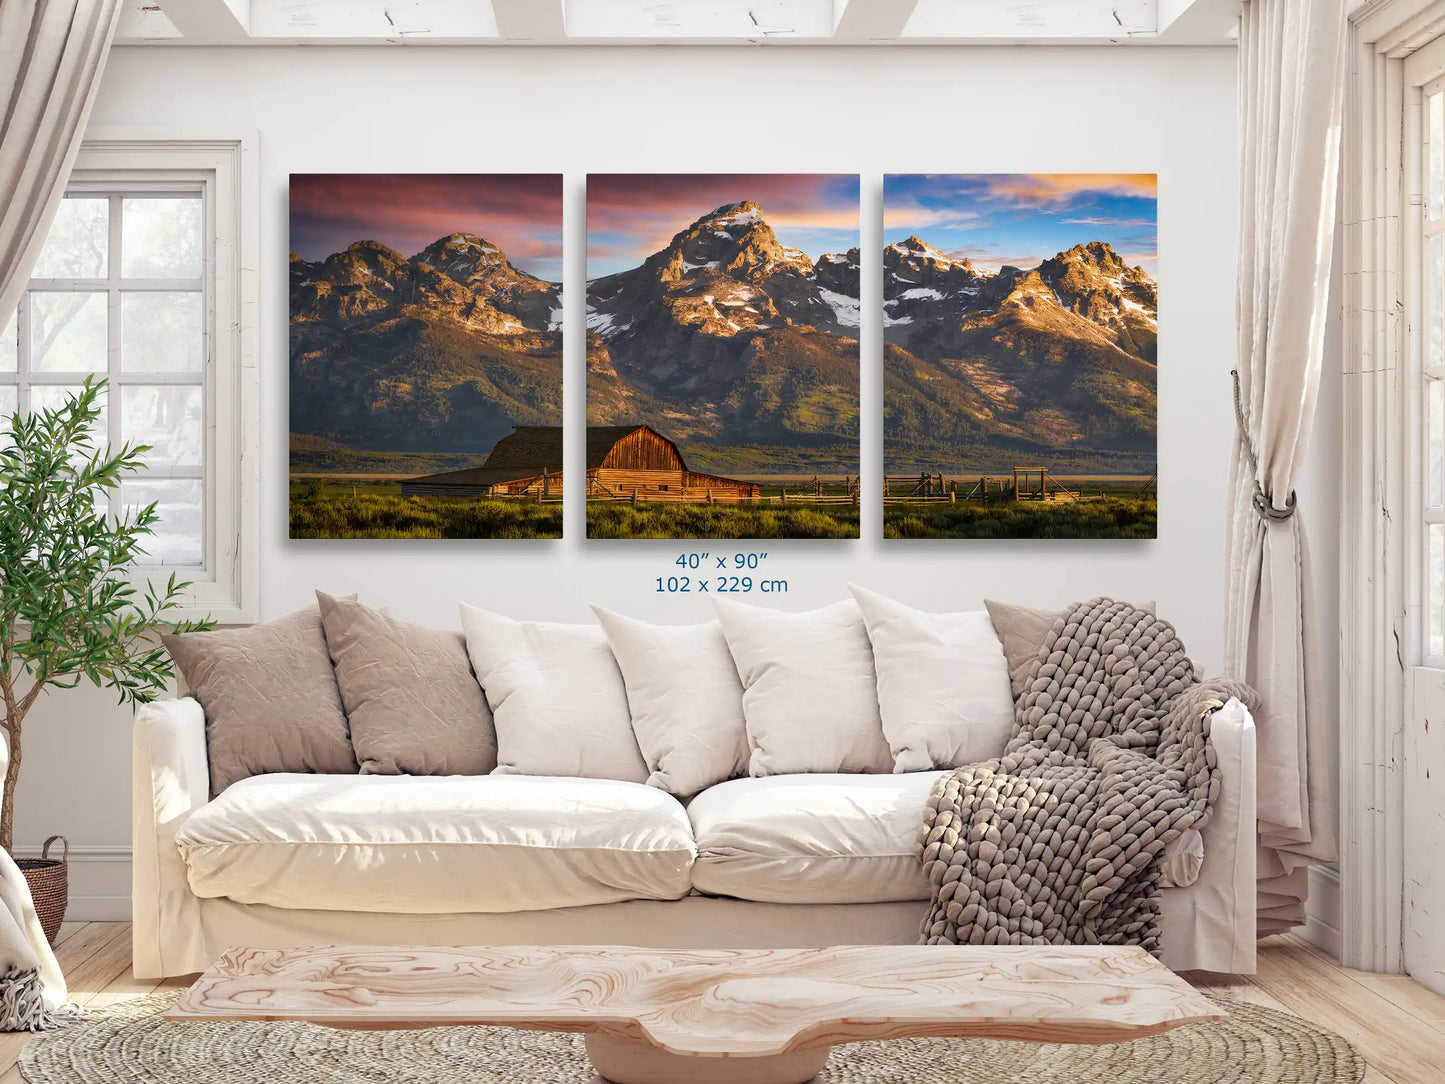 A wide 40x90 canvas print of the John Moulton Homestead in front of the Teton Mountains at sunrise, spanning the length of the couch for a dramatic effect in the living space.